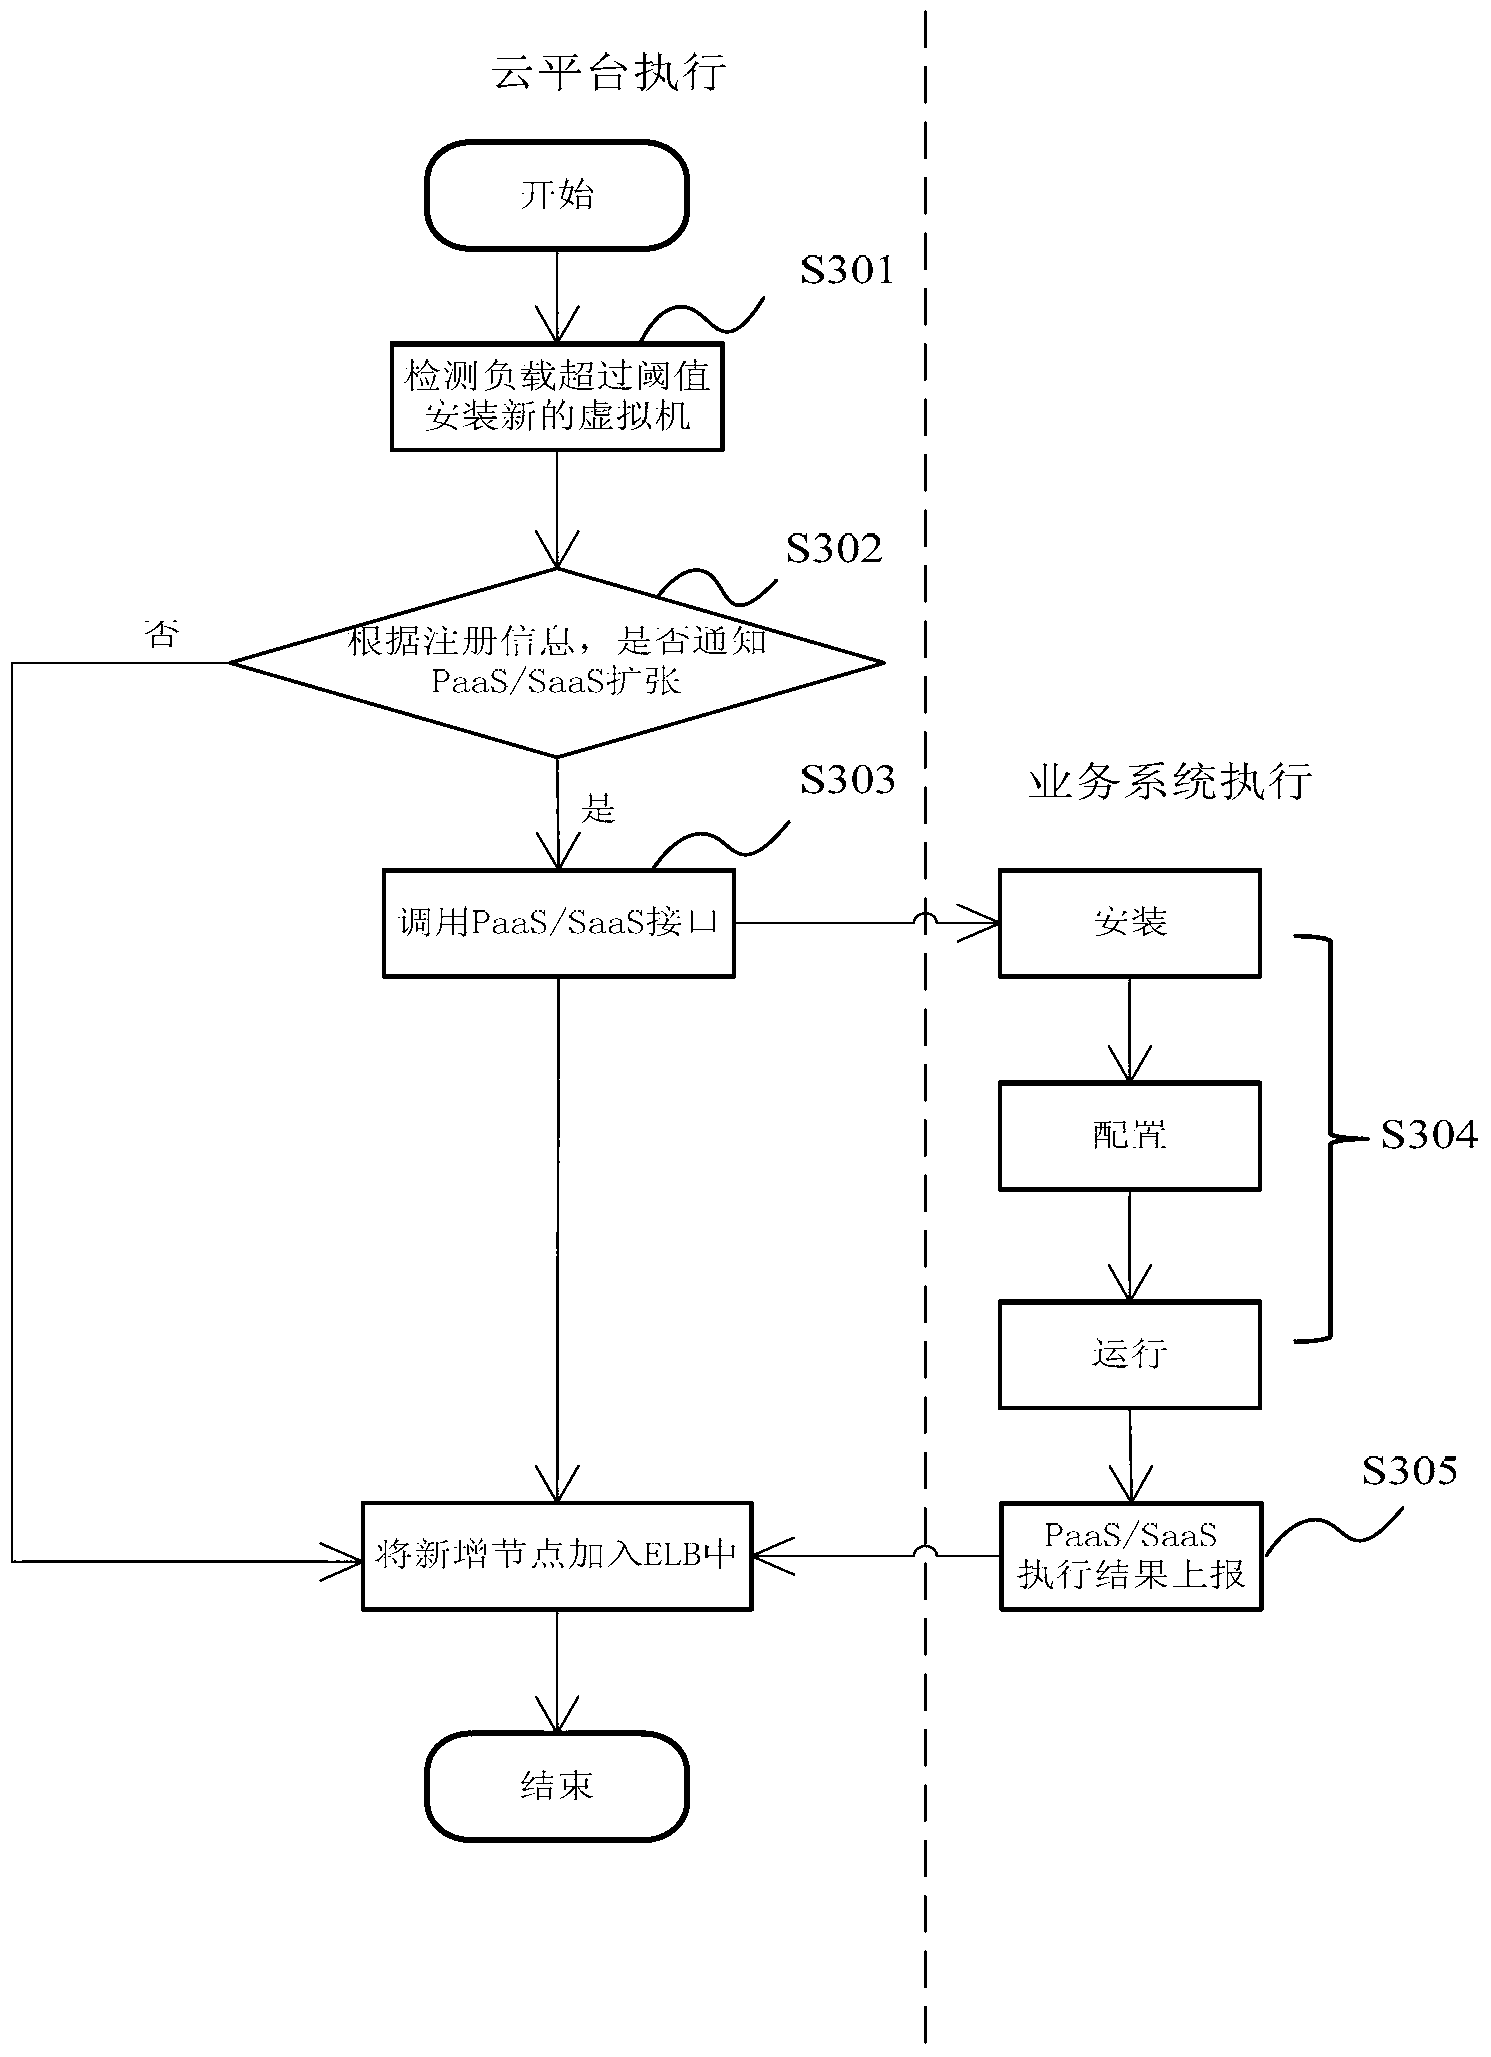 Method and device of cloud calculation service expansion and contraction